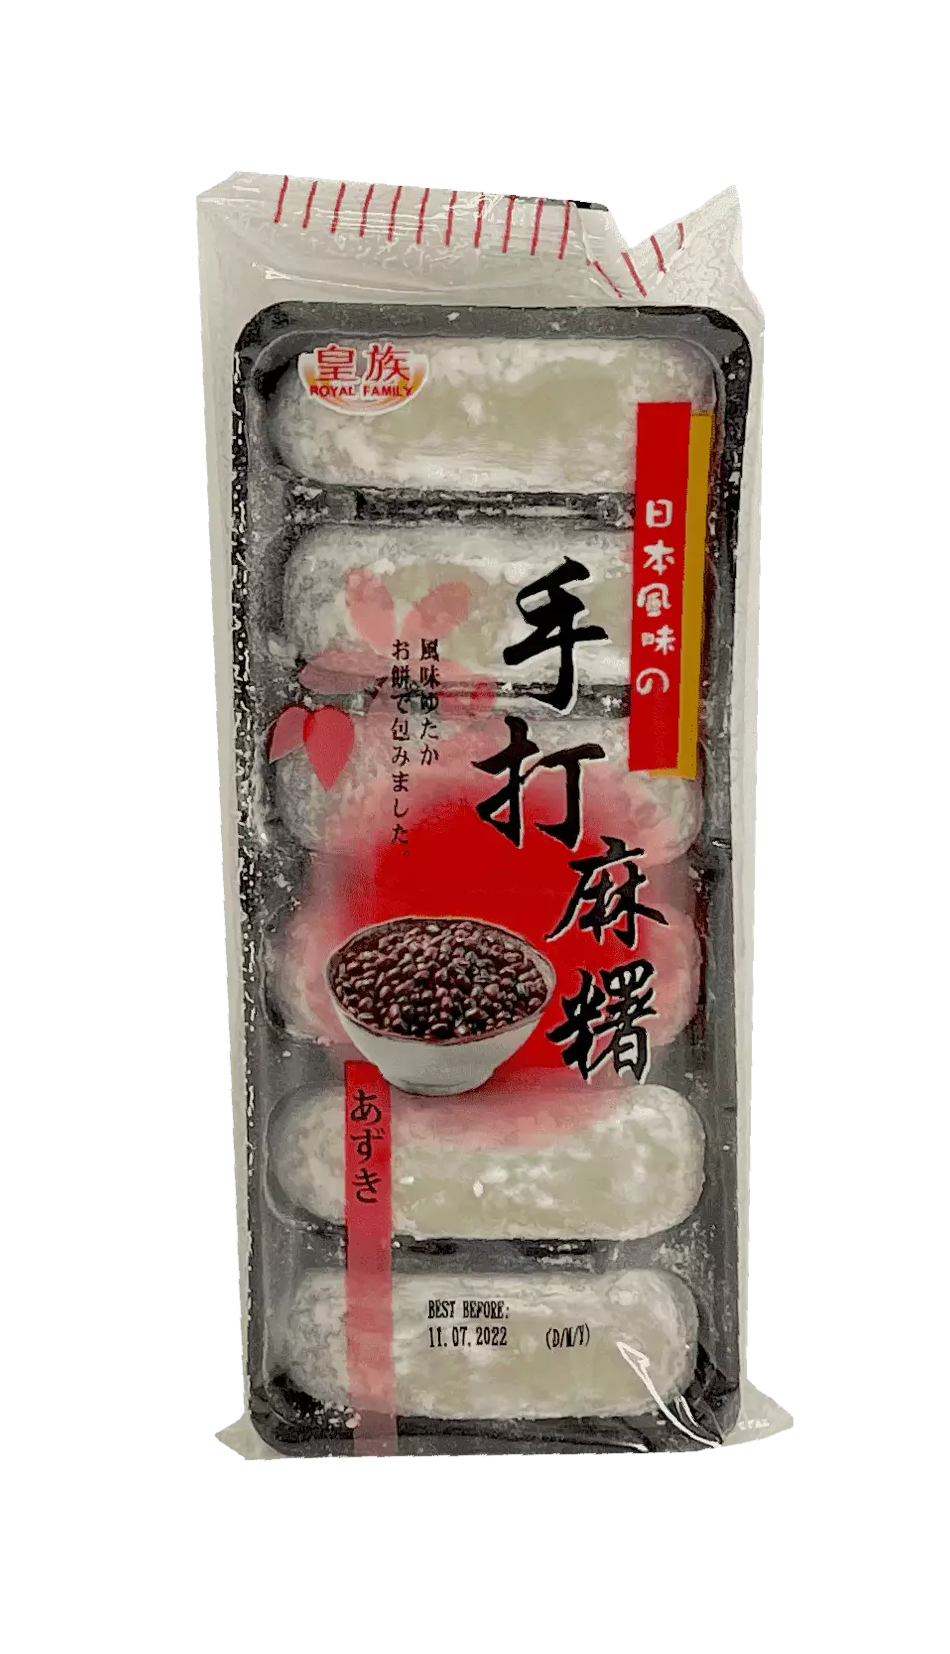 Handmade Mochi With Red Bean Paste Filling 180g Taiwan